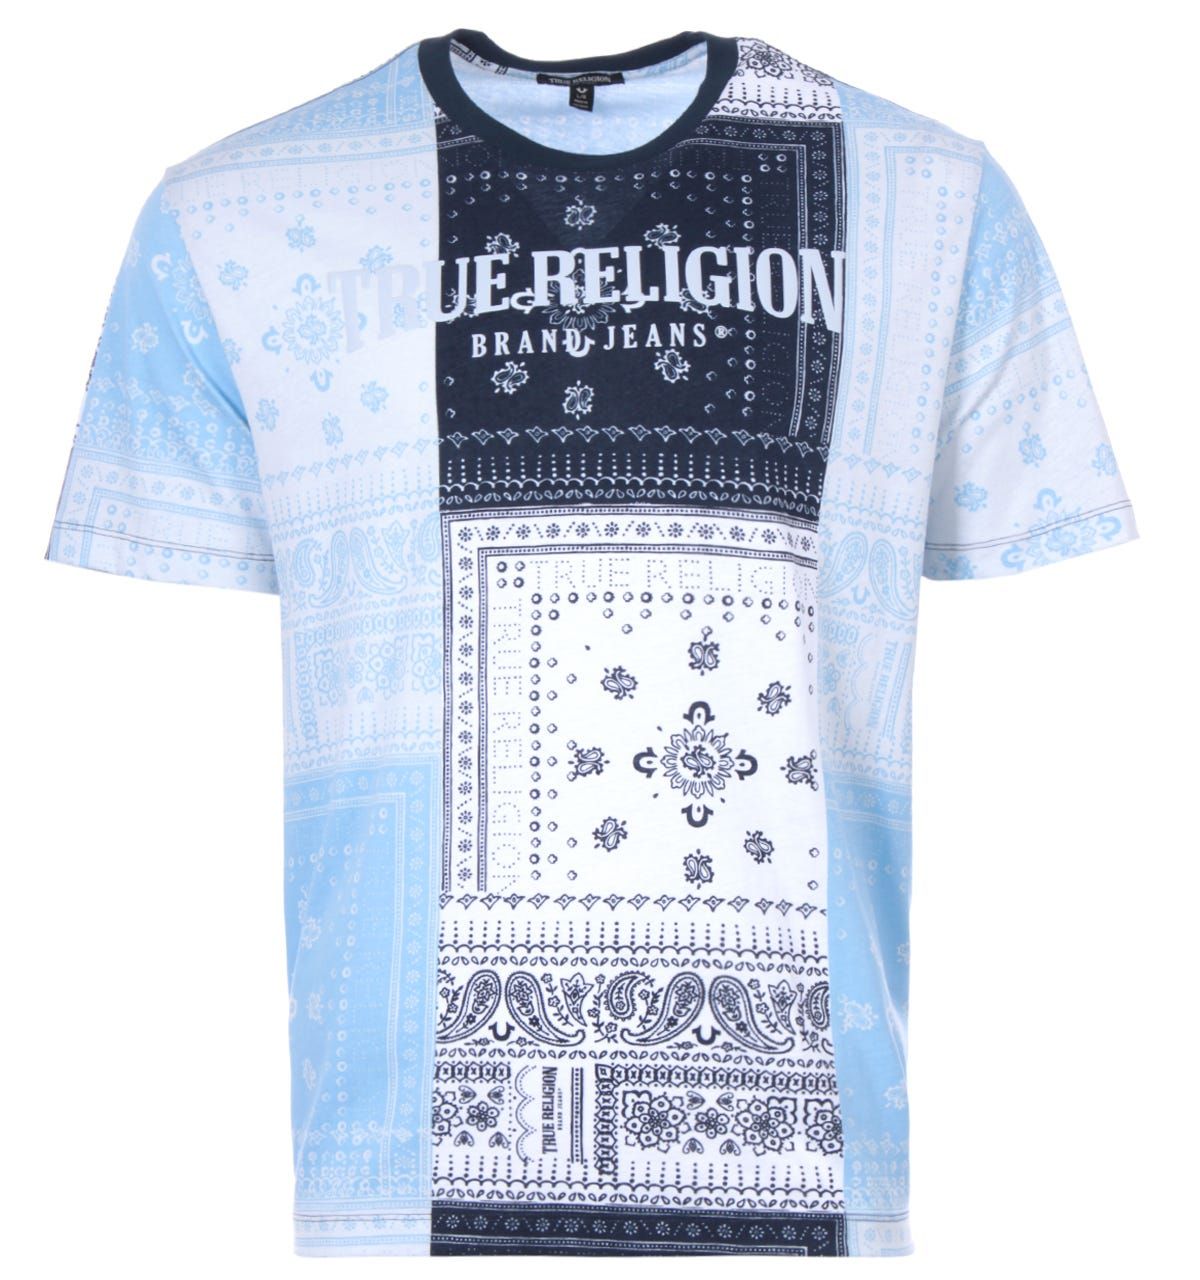 Mix things up with the Bandana T-Shirt from True Religion. Boasting their bold designs and crafted from pure cotton jersey in a relaxed fit offering optimum comfort without foregoing style. Featuring a ribbed crew neck, short sleeves and an allover paisley bandana inspired print. Finished with True Religion branding across the chest.Relaxed Fit, Pure Cotton Jersey, Ribbed Crew Neck, Short Sleeves, All Over Print, True Religion Branding. Fit & Style:Relaxed Fit, Fits True to Size. Composition & Care:100% Cotton, Machine Wash.